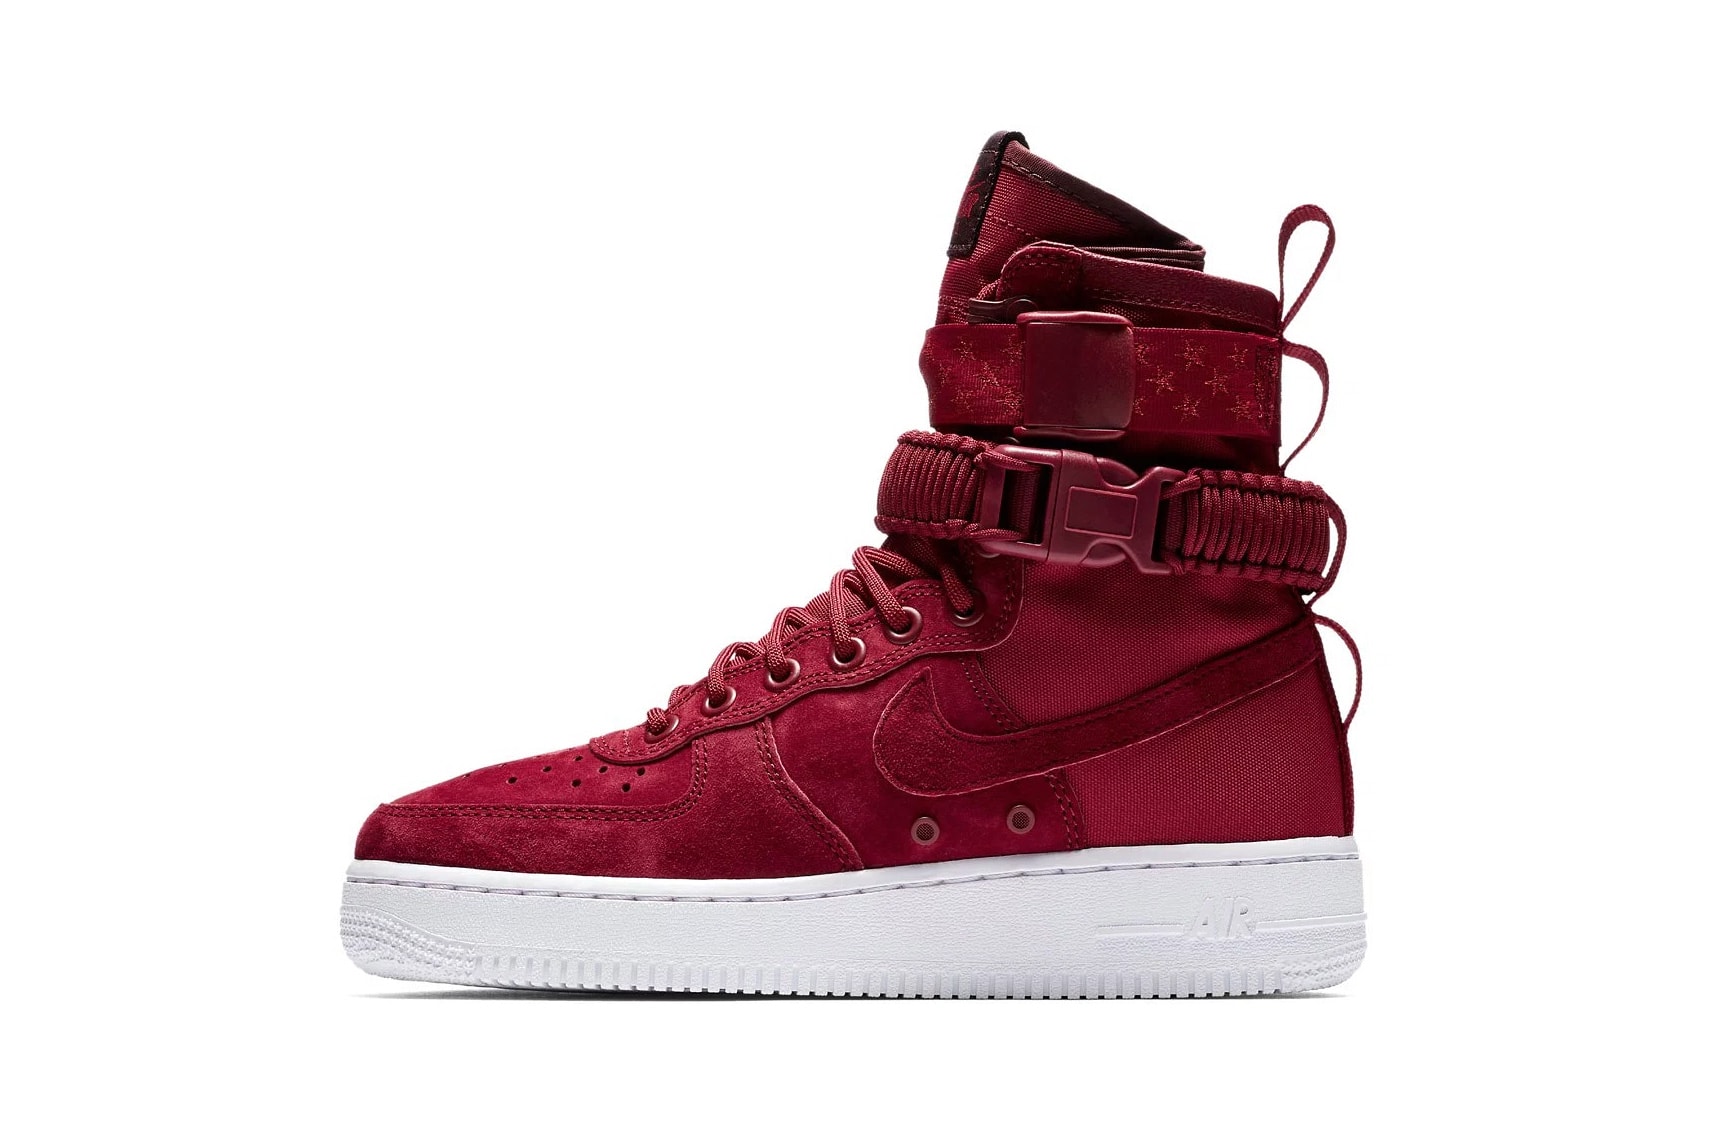 Nike SF-AF1 Mid Red Crush-White-Burgundy Crush Release info purchase price summer colorway sneaker footwear